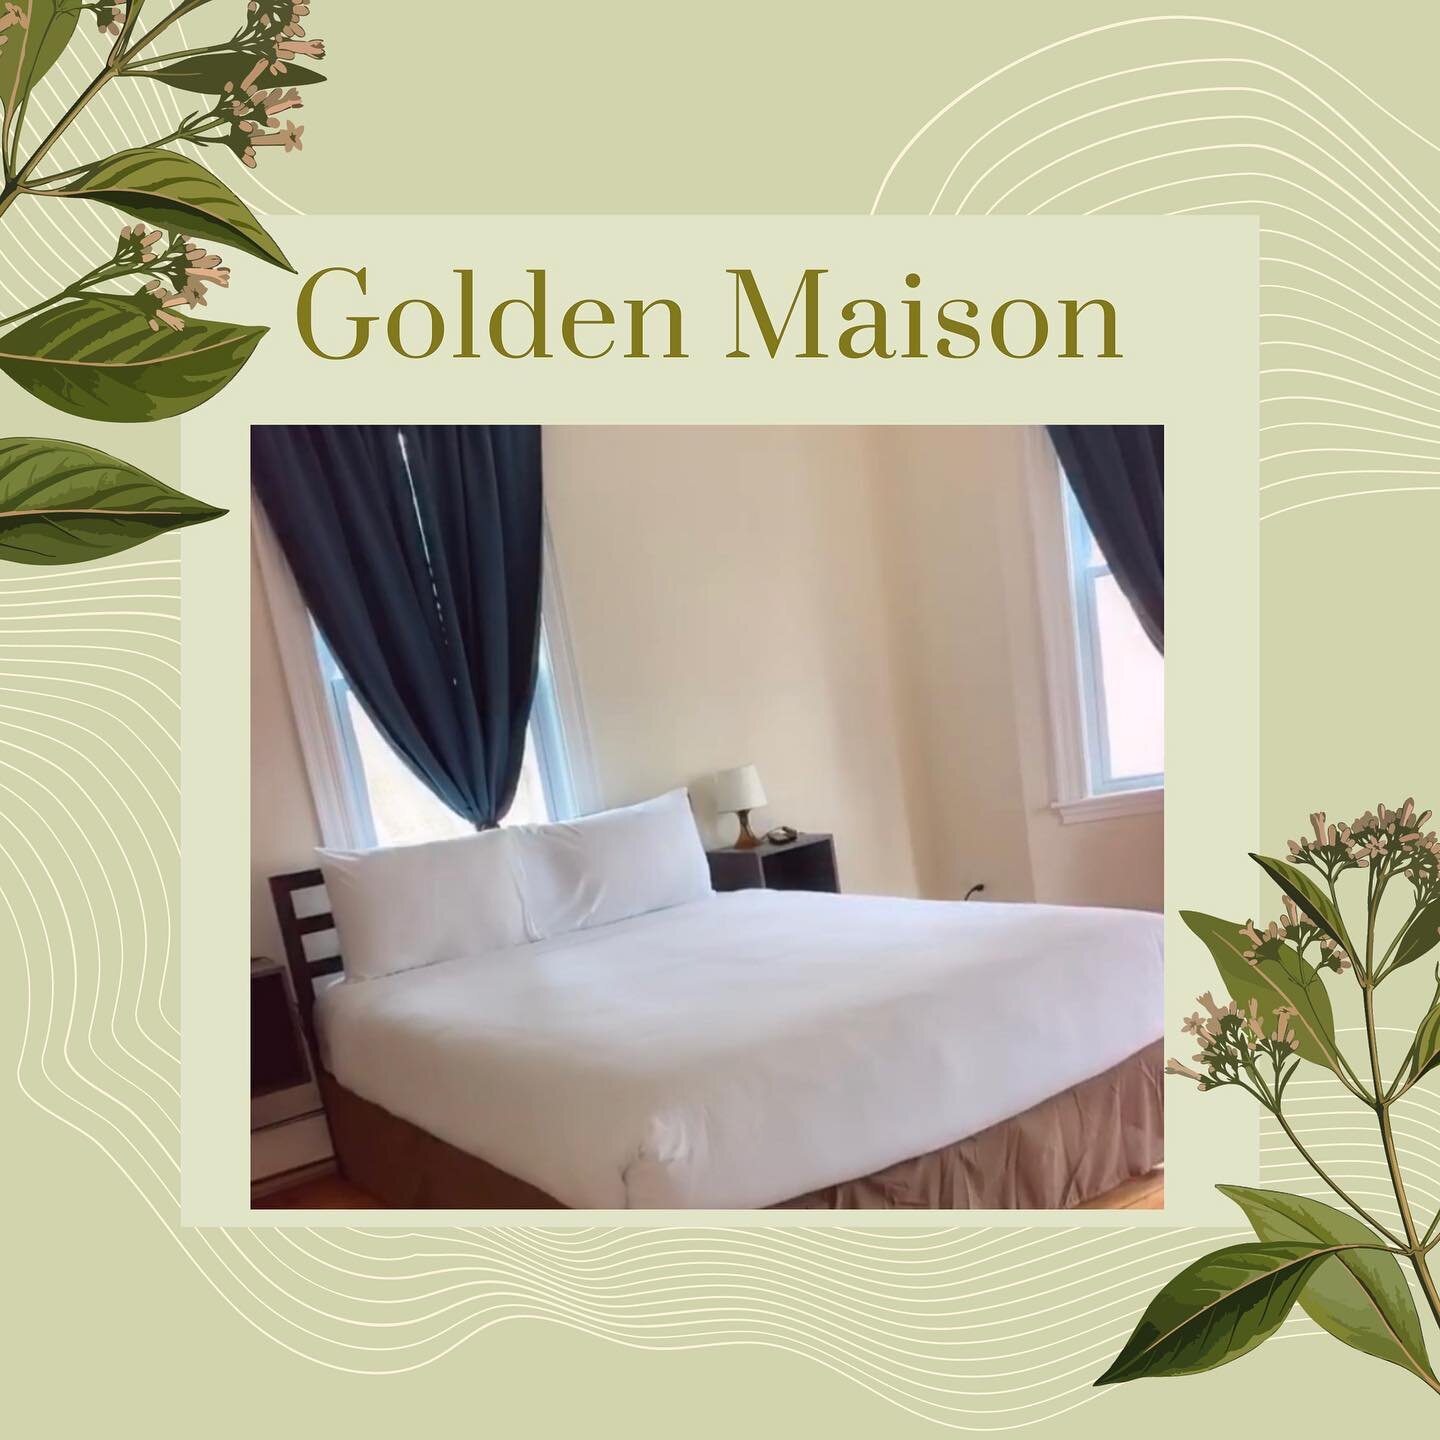 It Lowers Your Stress and Improves Your Mood!
⁣
A properly made bed instantly makes the entire room look pulled together, creating a subtle vibe of tranquility and competence. 
.
.
.

#YourGoldenHome #StayGolden
#GoldenMaisonServices #ResidentialClea